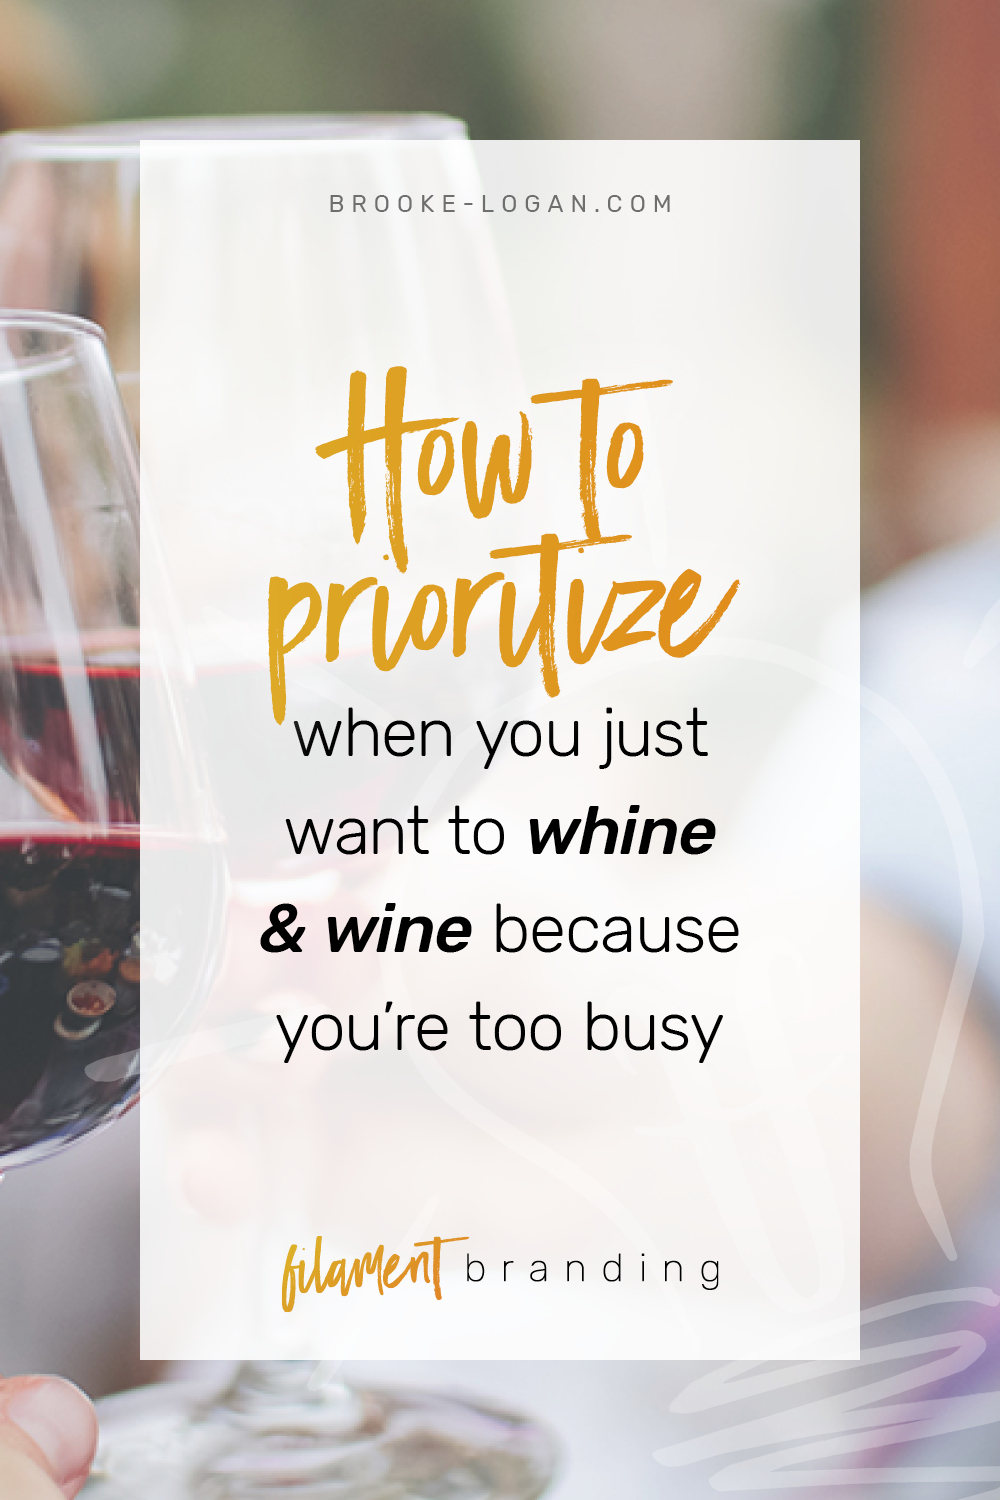 Ep 8: How to prioritize when you just want to whine & wine because you’re too busy